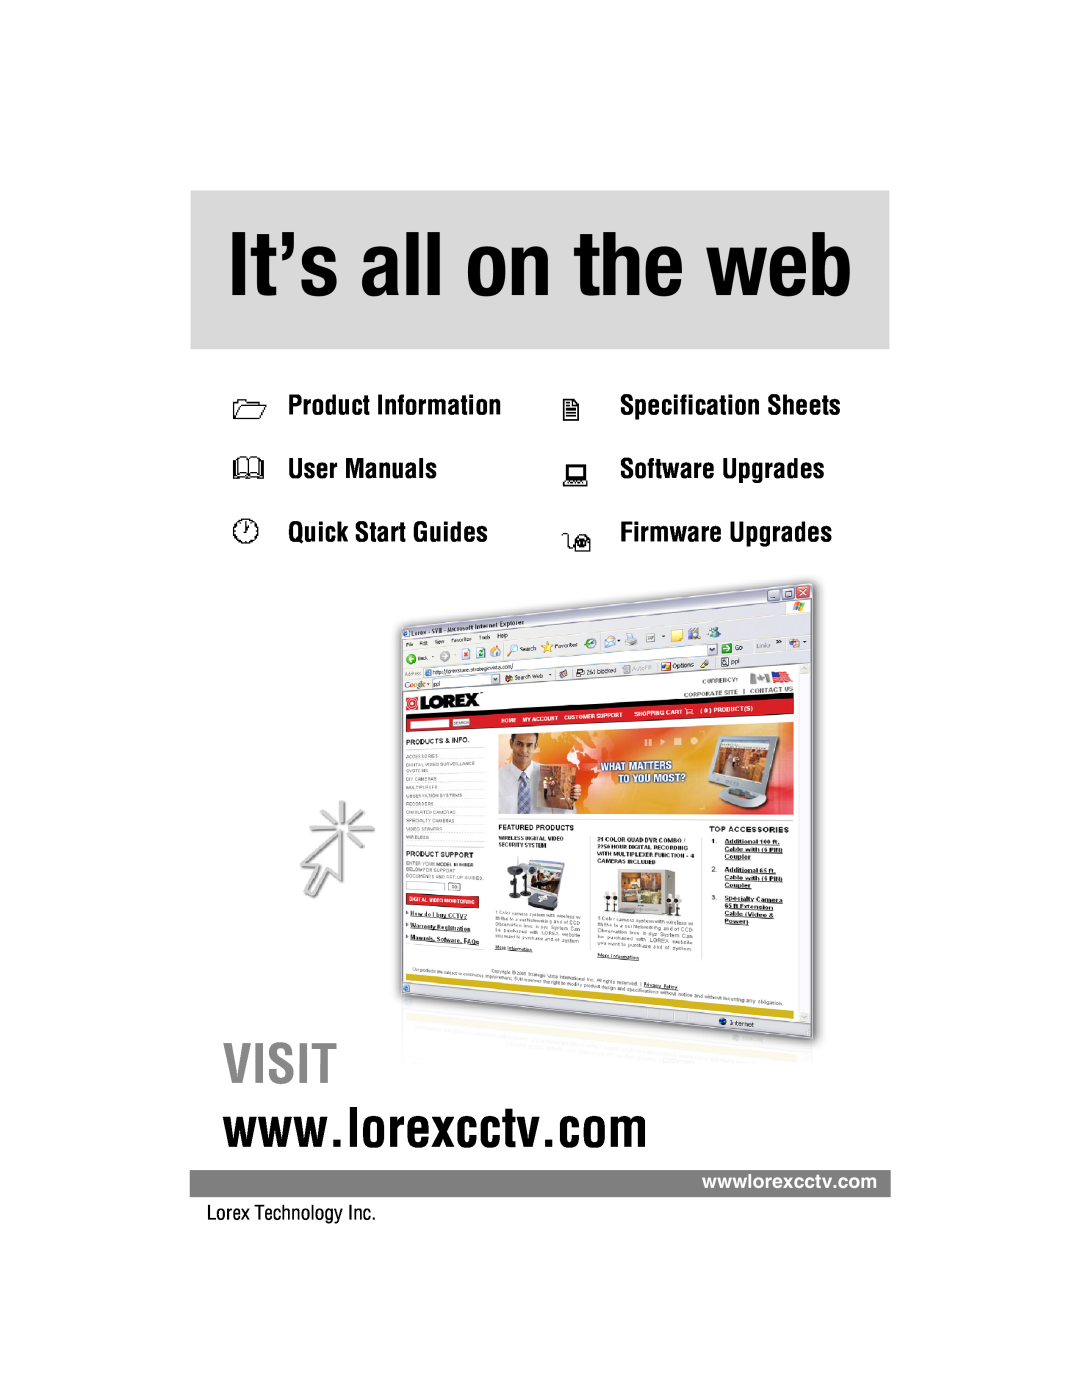 LOREX Technology SHS-2S7LD Series It’s all on the web, Visit, Product Information, Quick Start Guides, Software Upgrades 